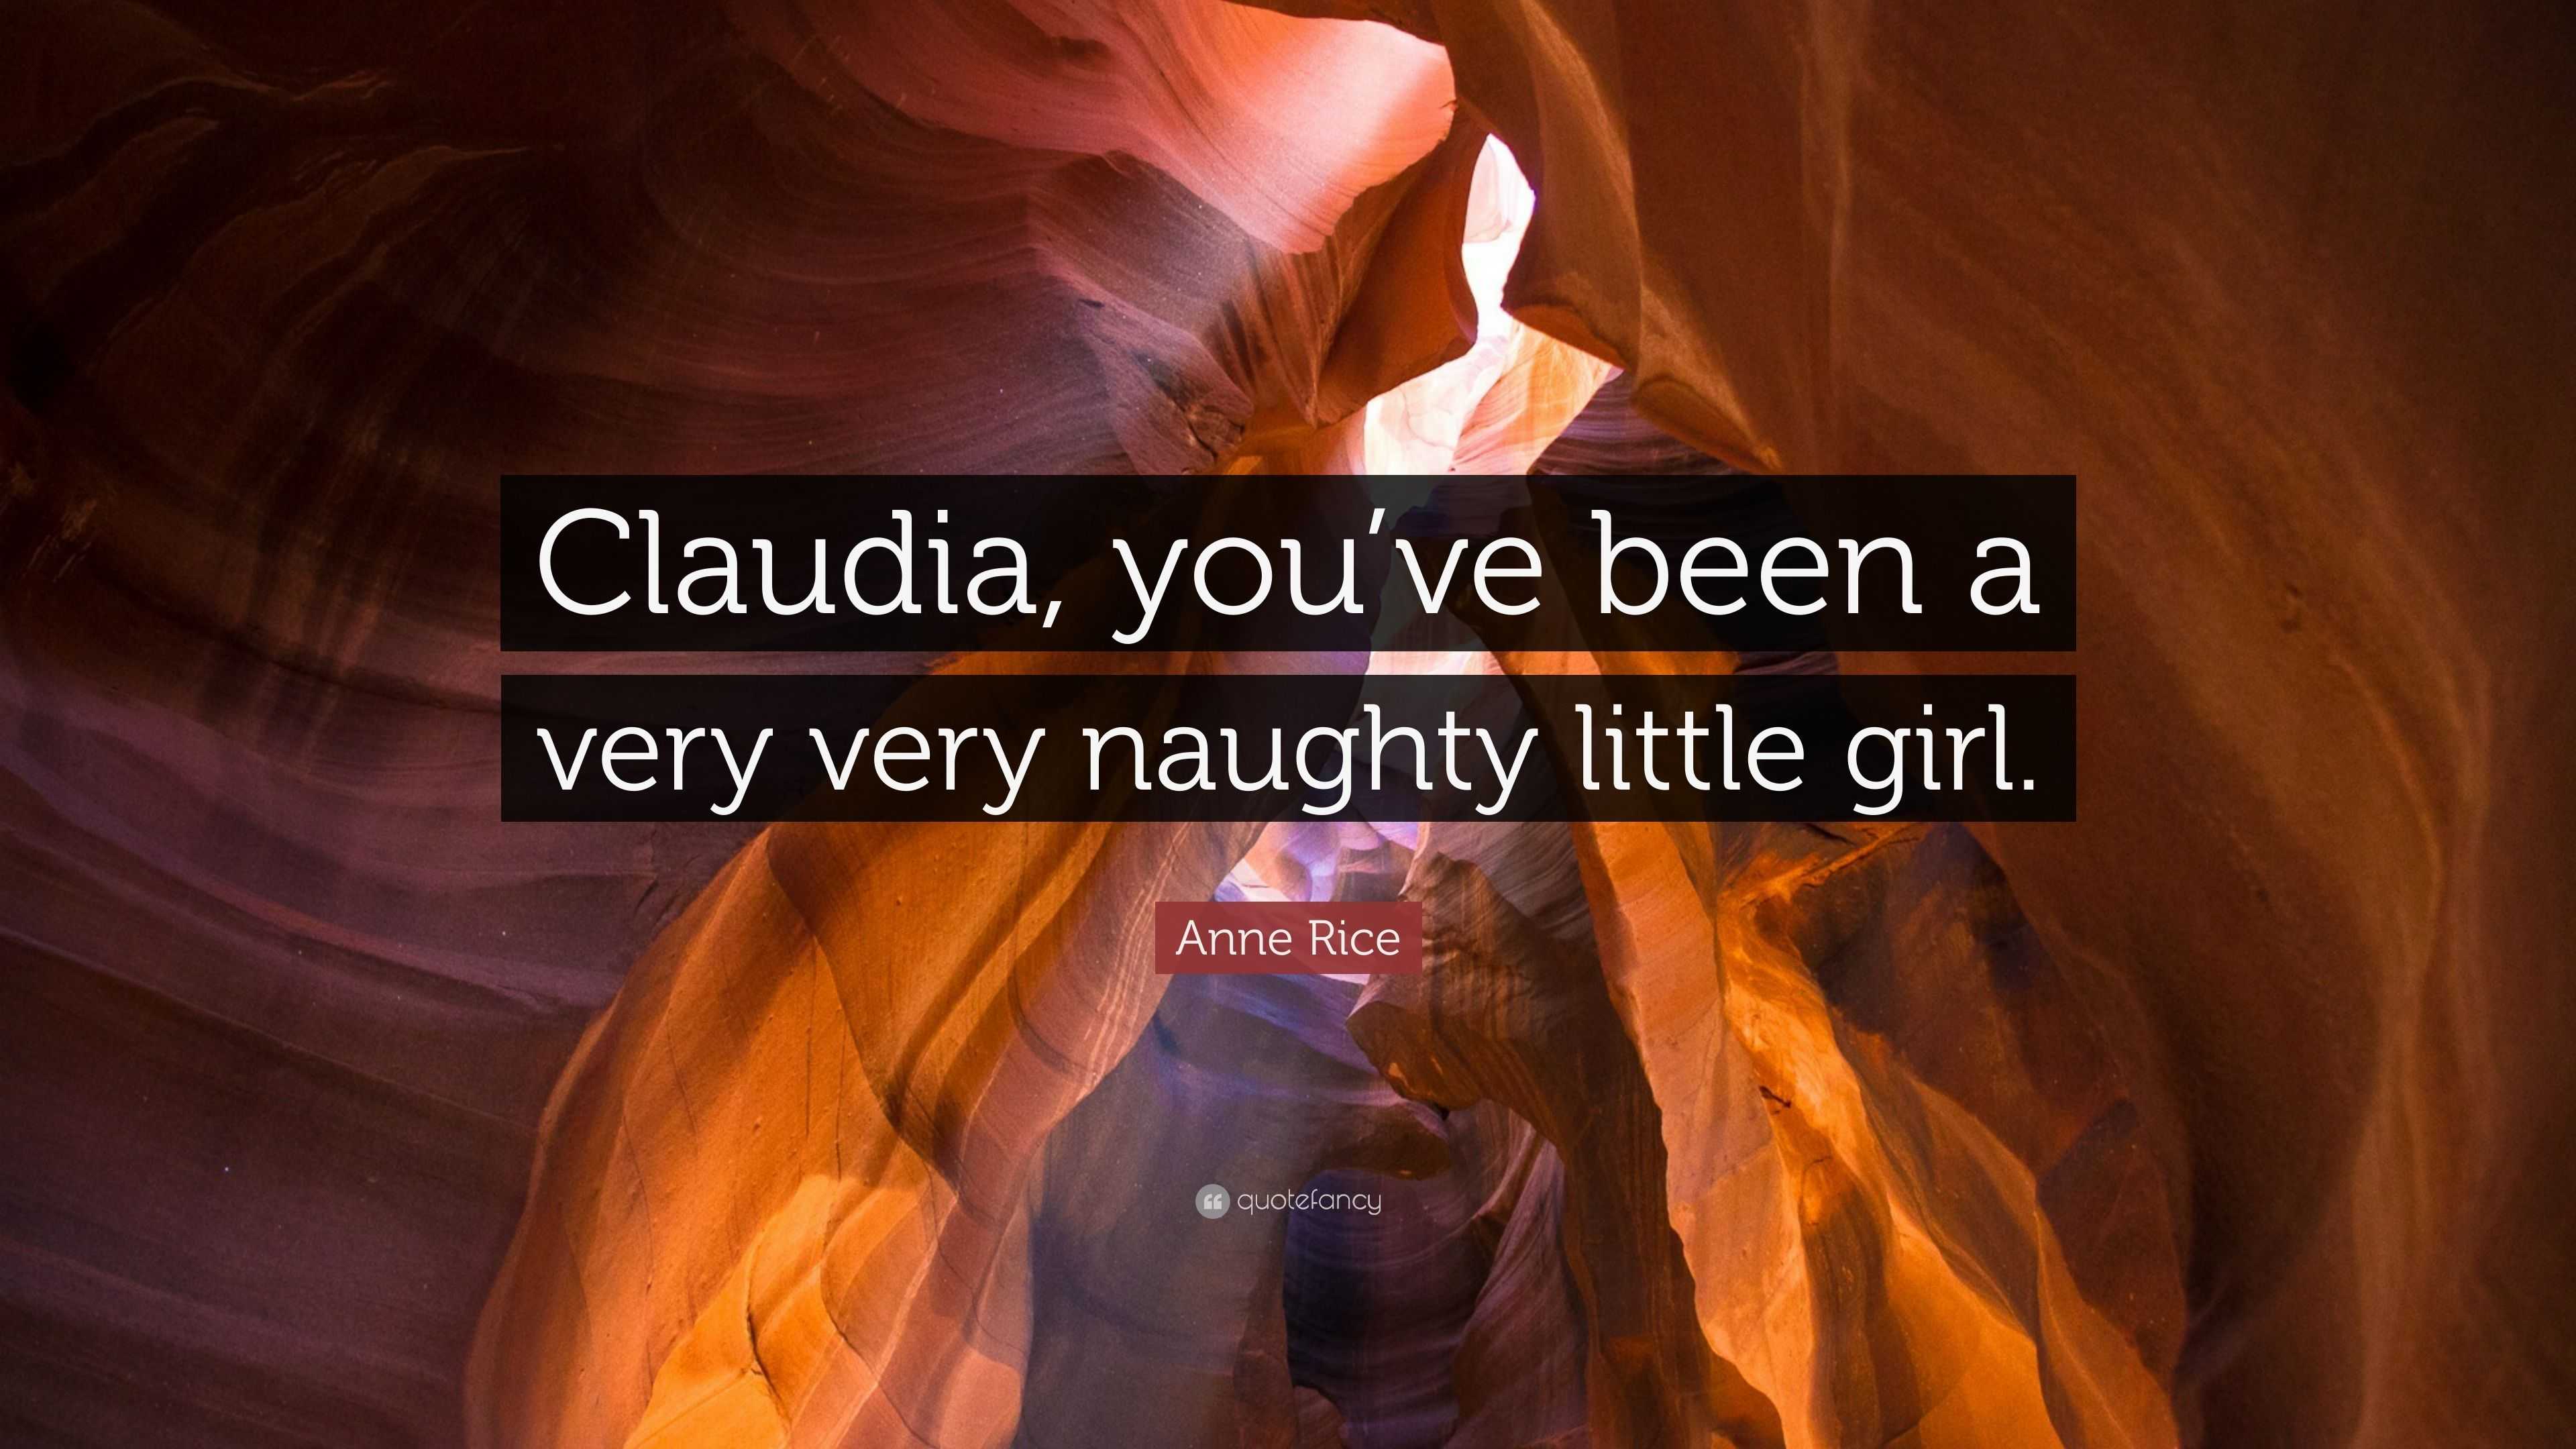 Anne Rice Quote: "Claudia, you've been a very very naughty little girl." (10 wallpapers ...